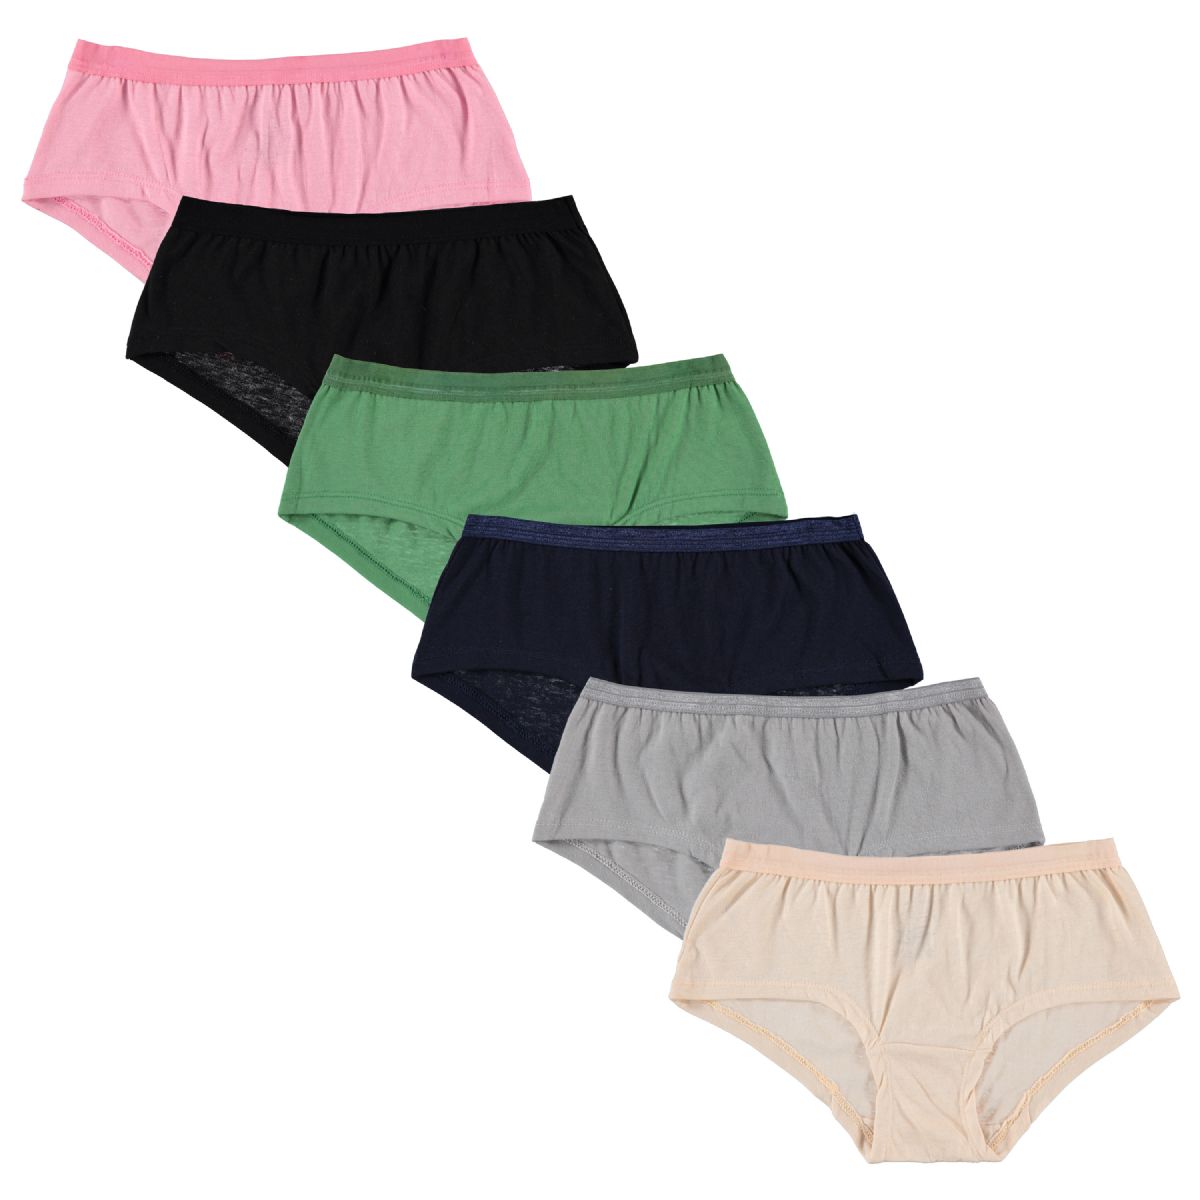 432 Wholesale Sofra Cotton Thong Panty Size M